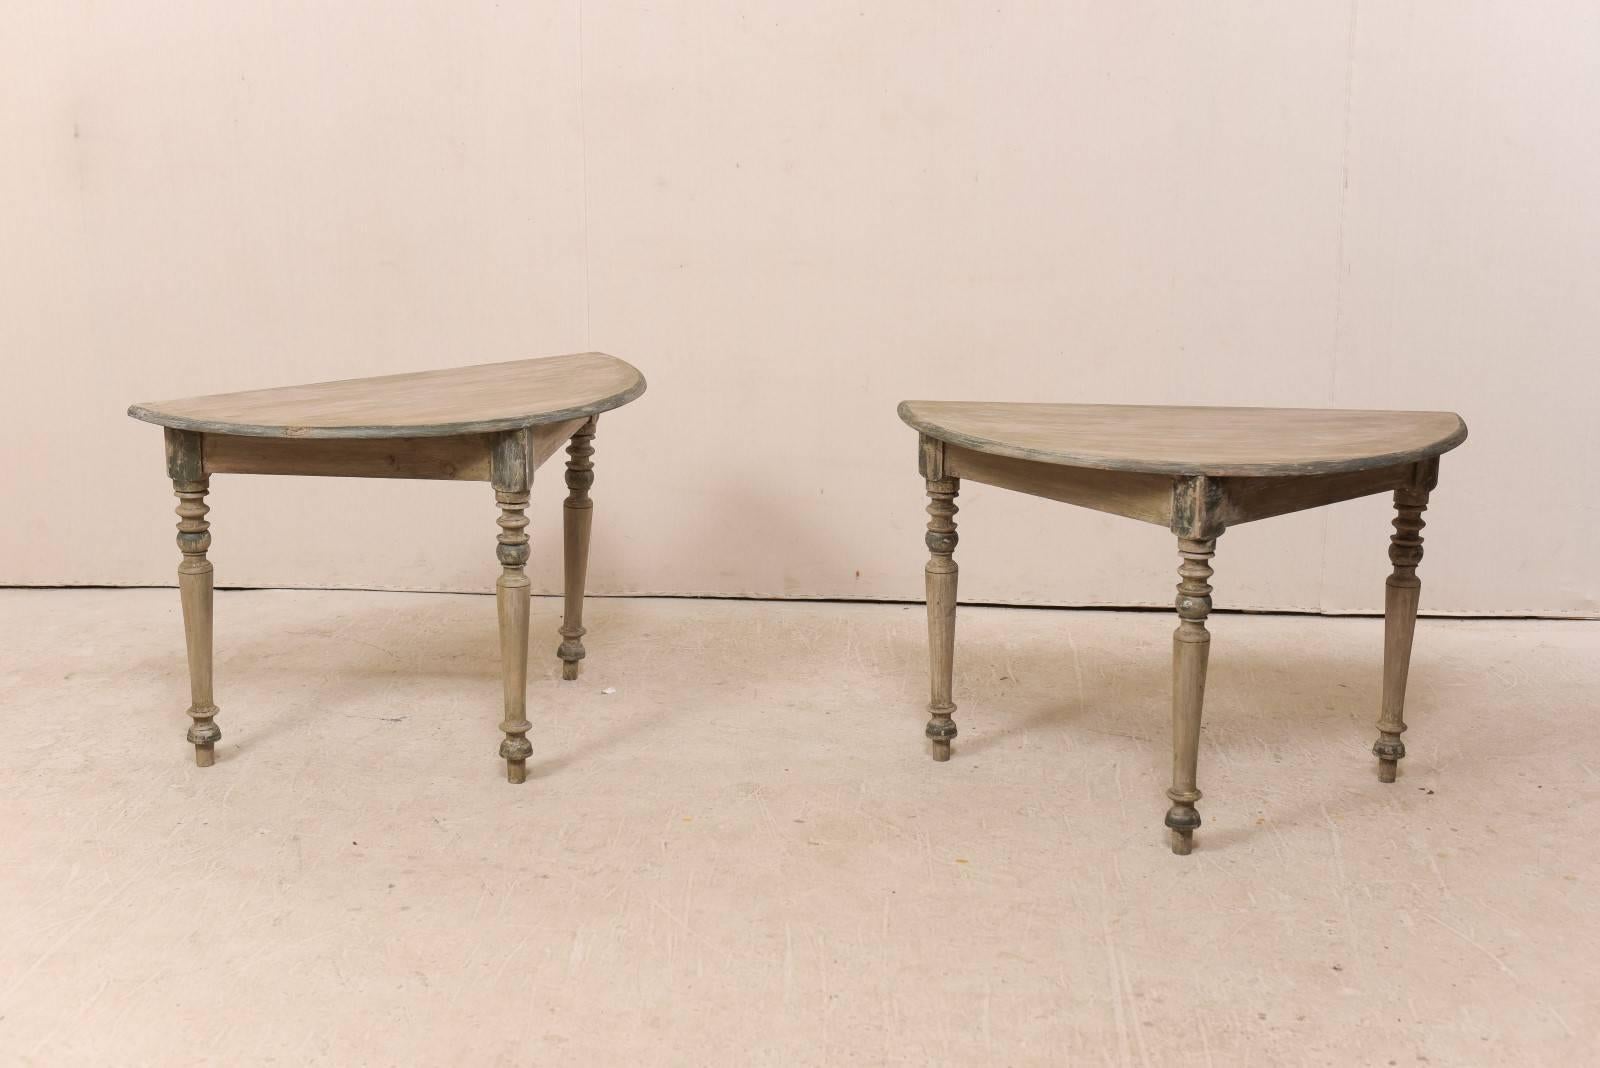 A pair of 19th century Swedish painted wood demilune tables. This pair of antique painted wood demilune tables from Sweden feature half moon, semi-circular tops over triangular aprons. The tables are presented upon three beautifully turned legs.